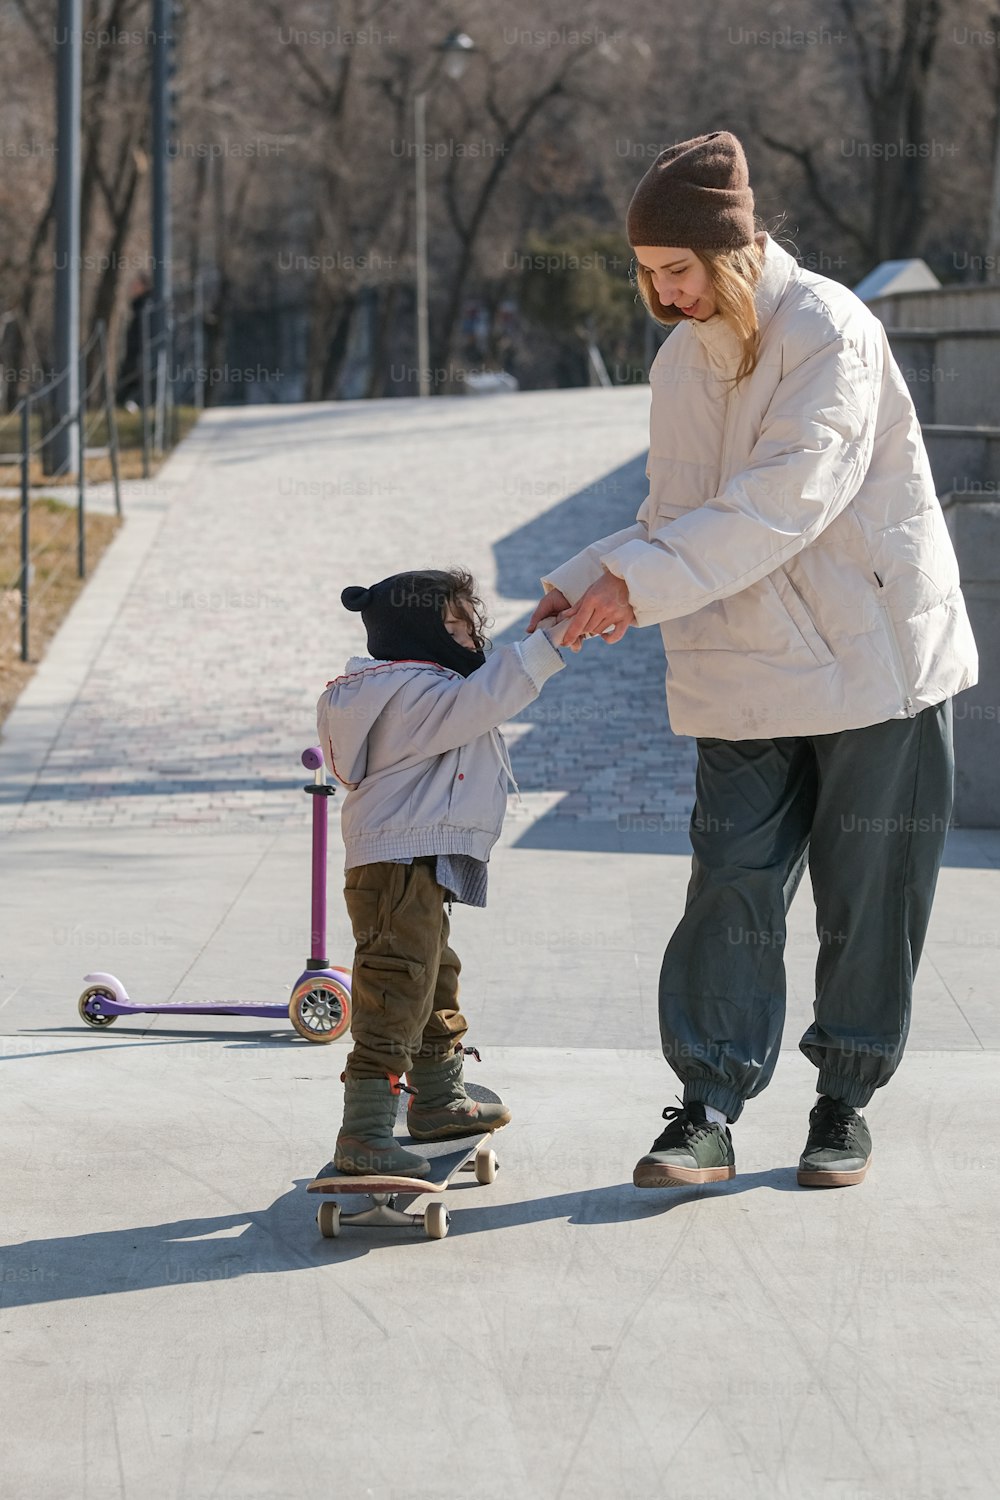 a man teaching a small child how to ride a skateboard